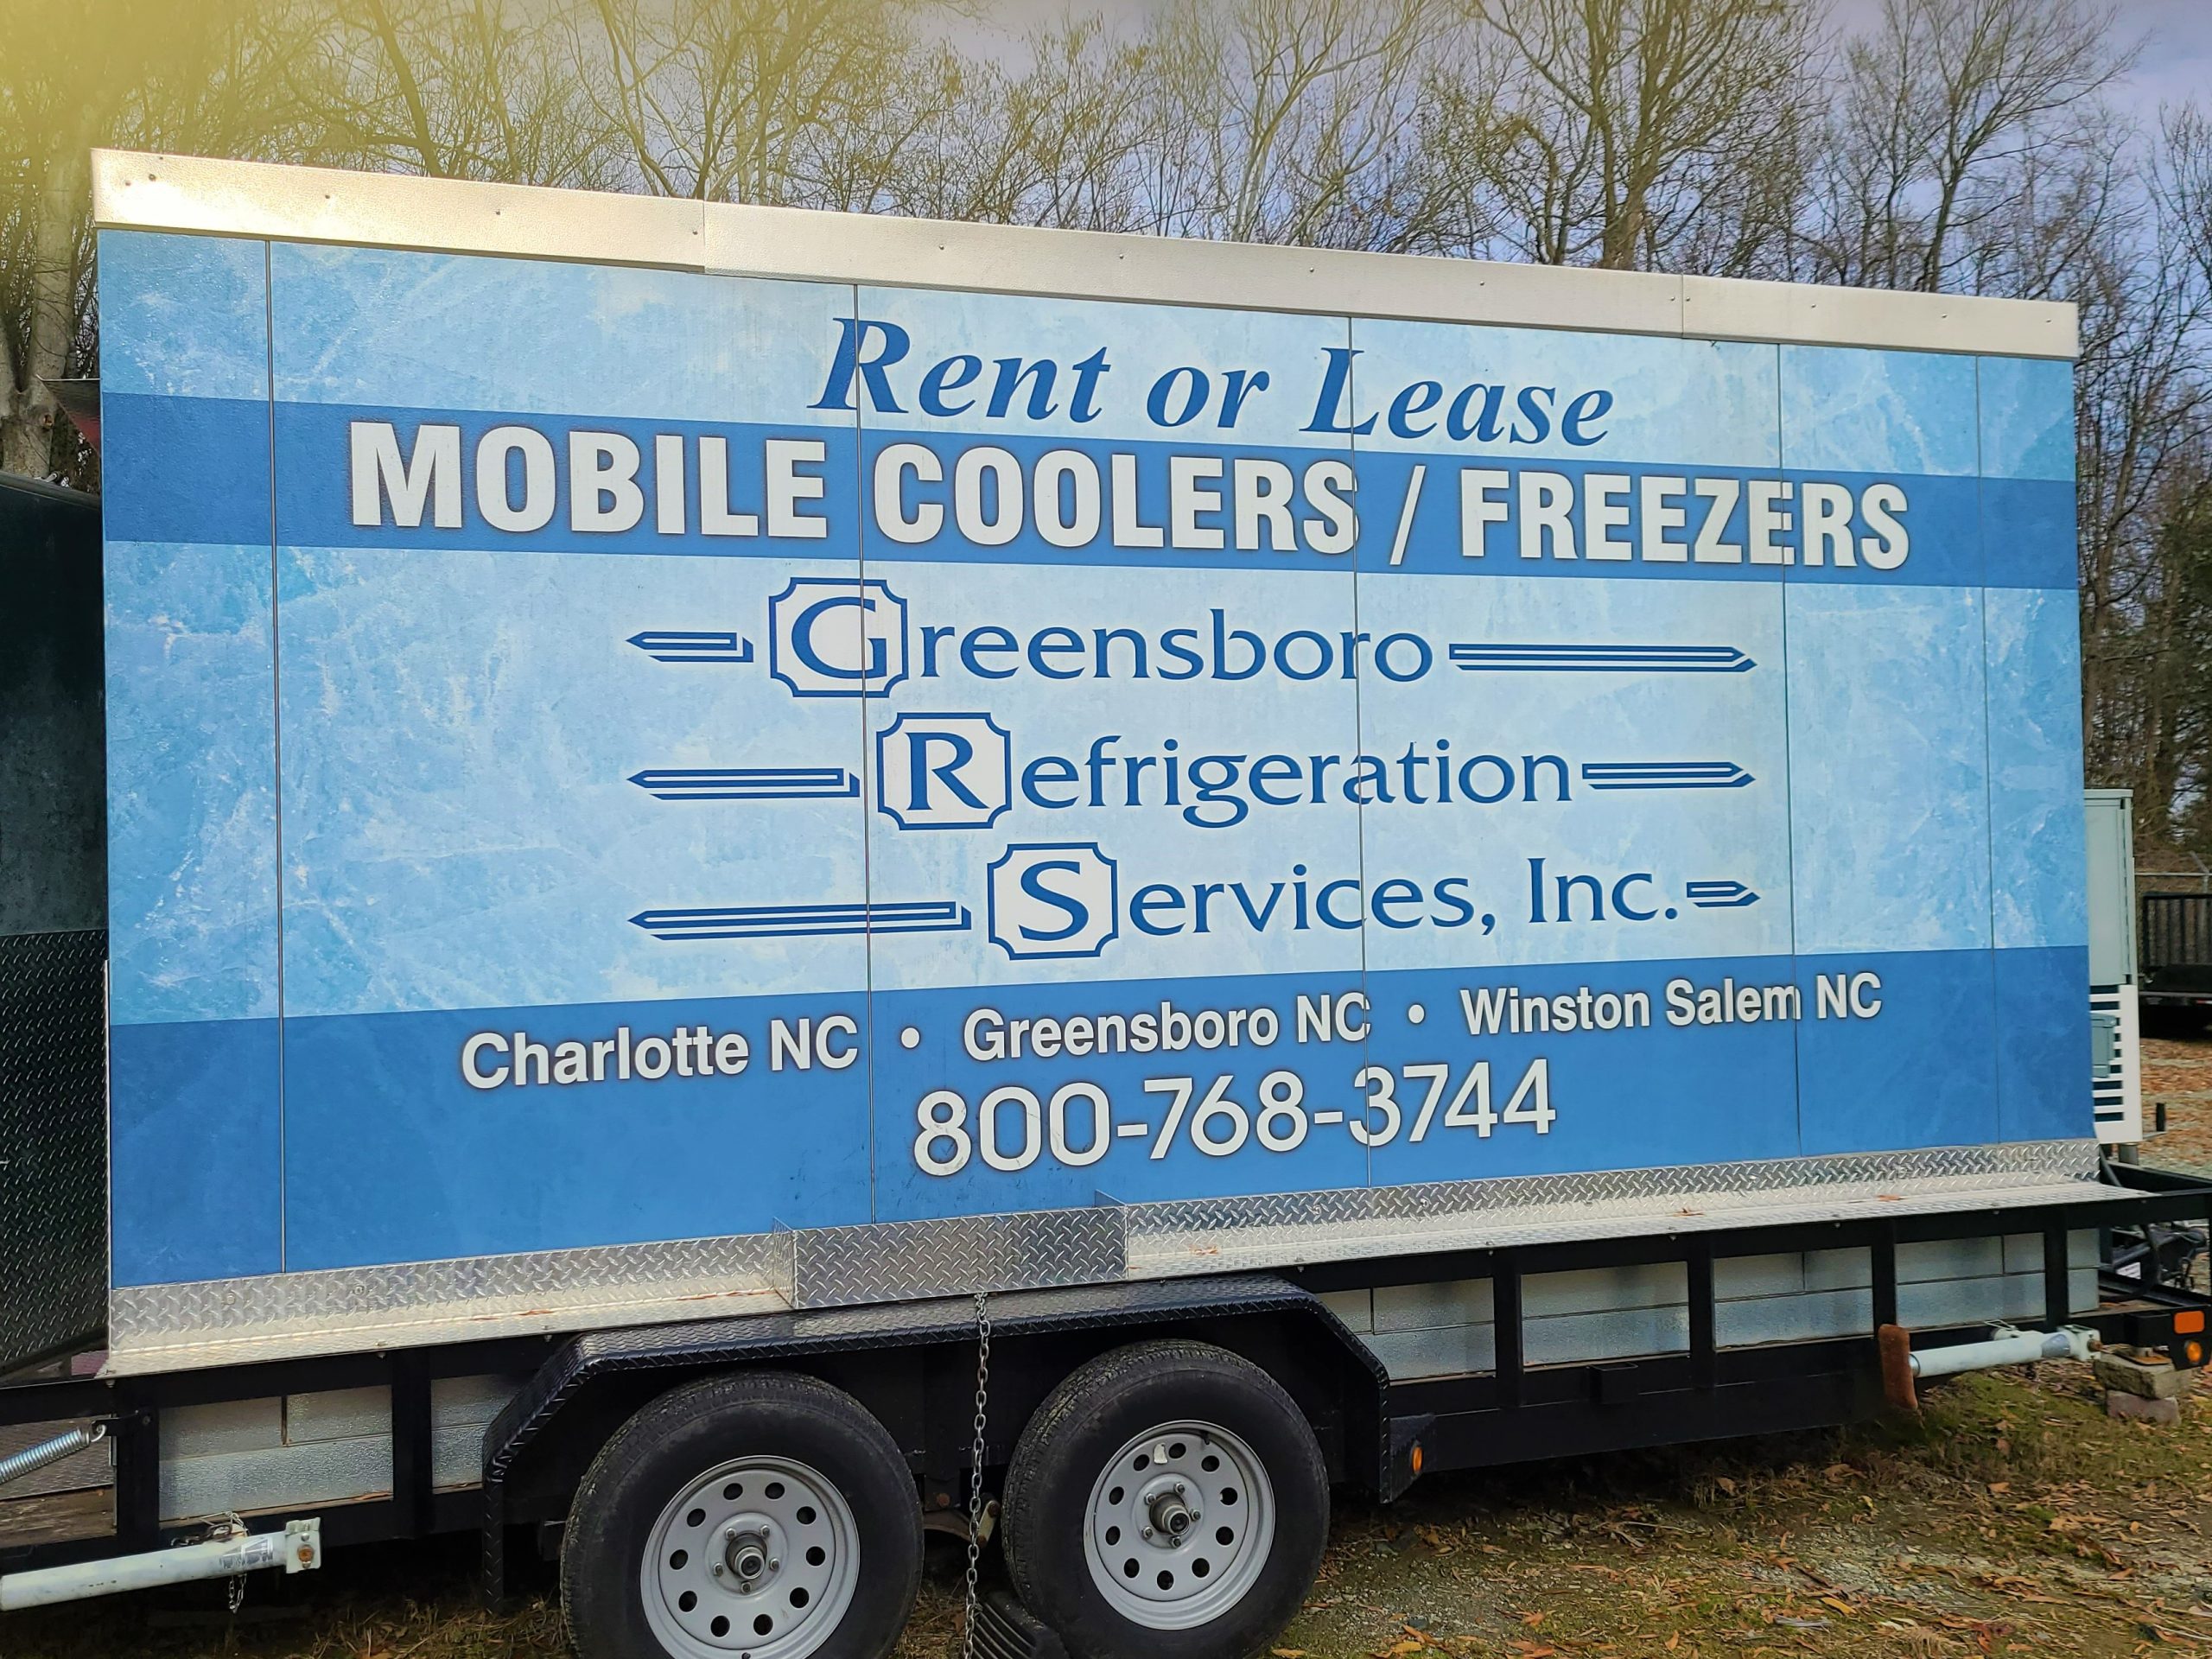 Rent or lease mobile coolers and freezers